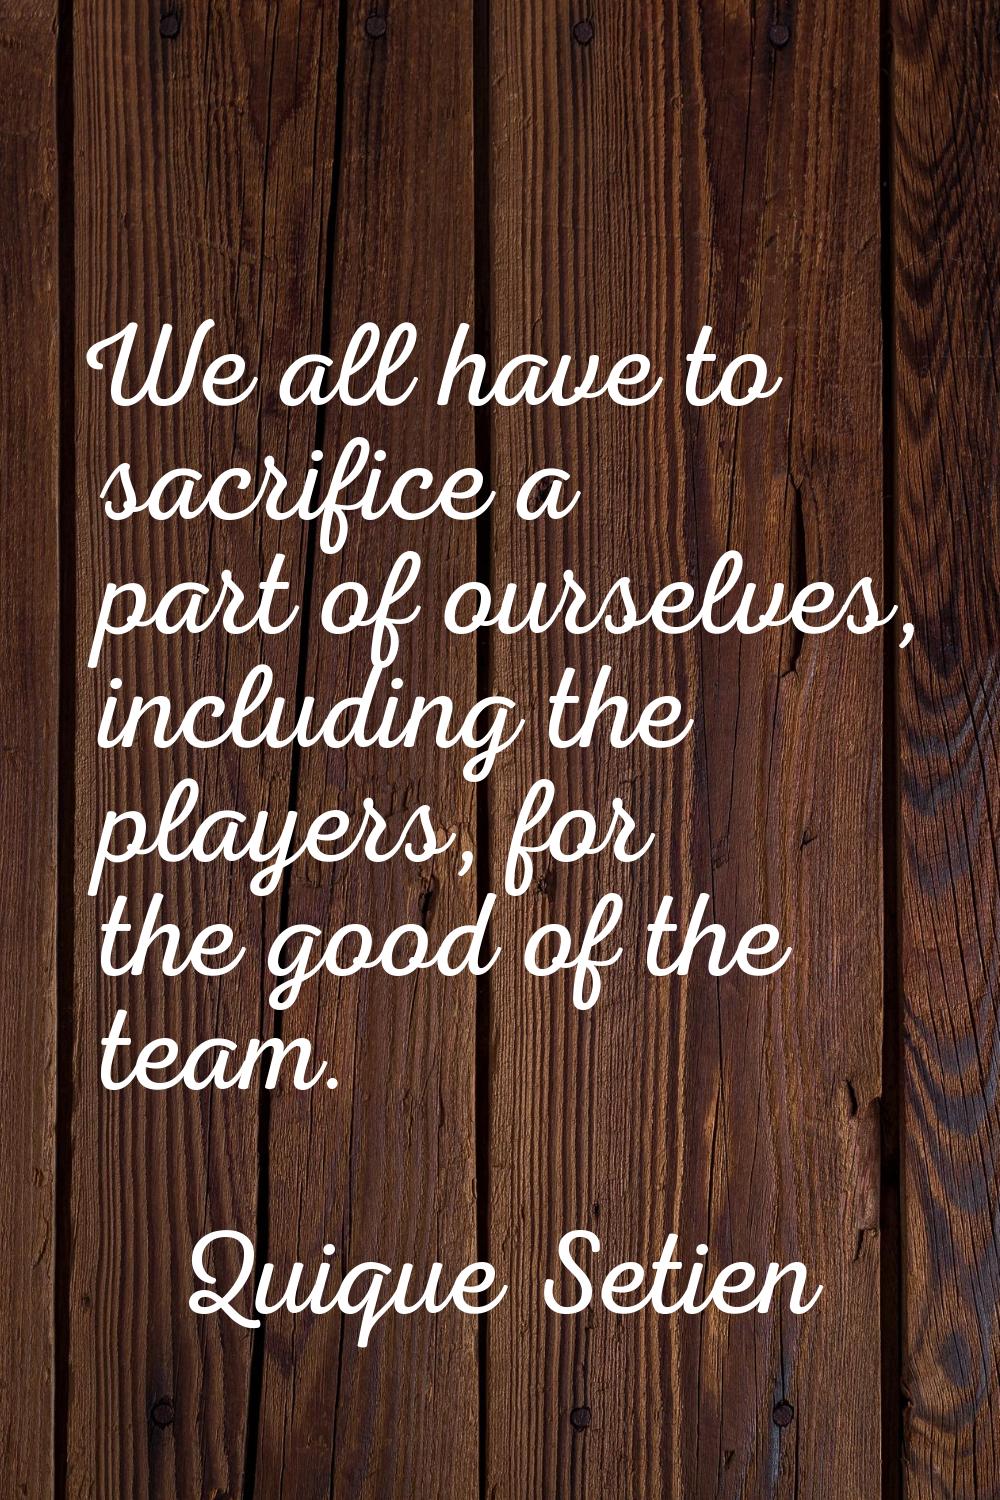 We all have to sacrifice a part of ourselves, including the players, for the good of the team.